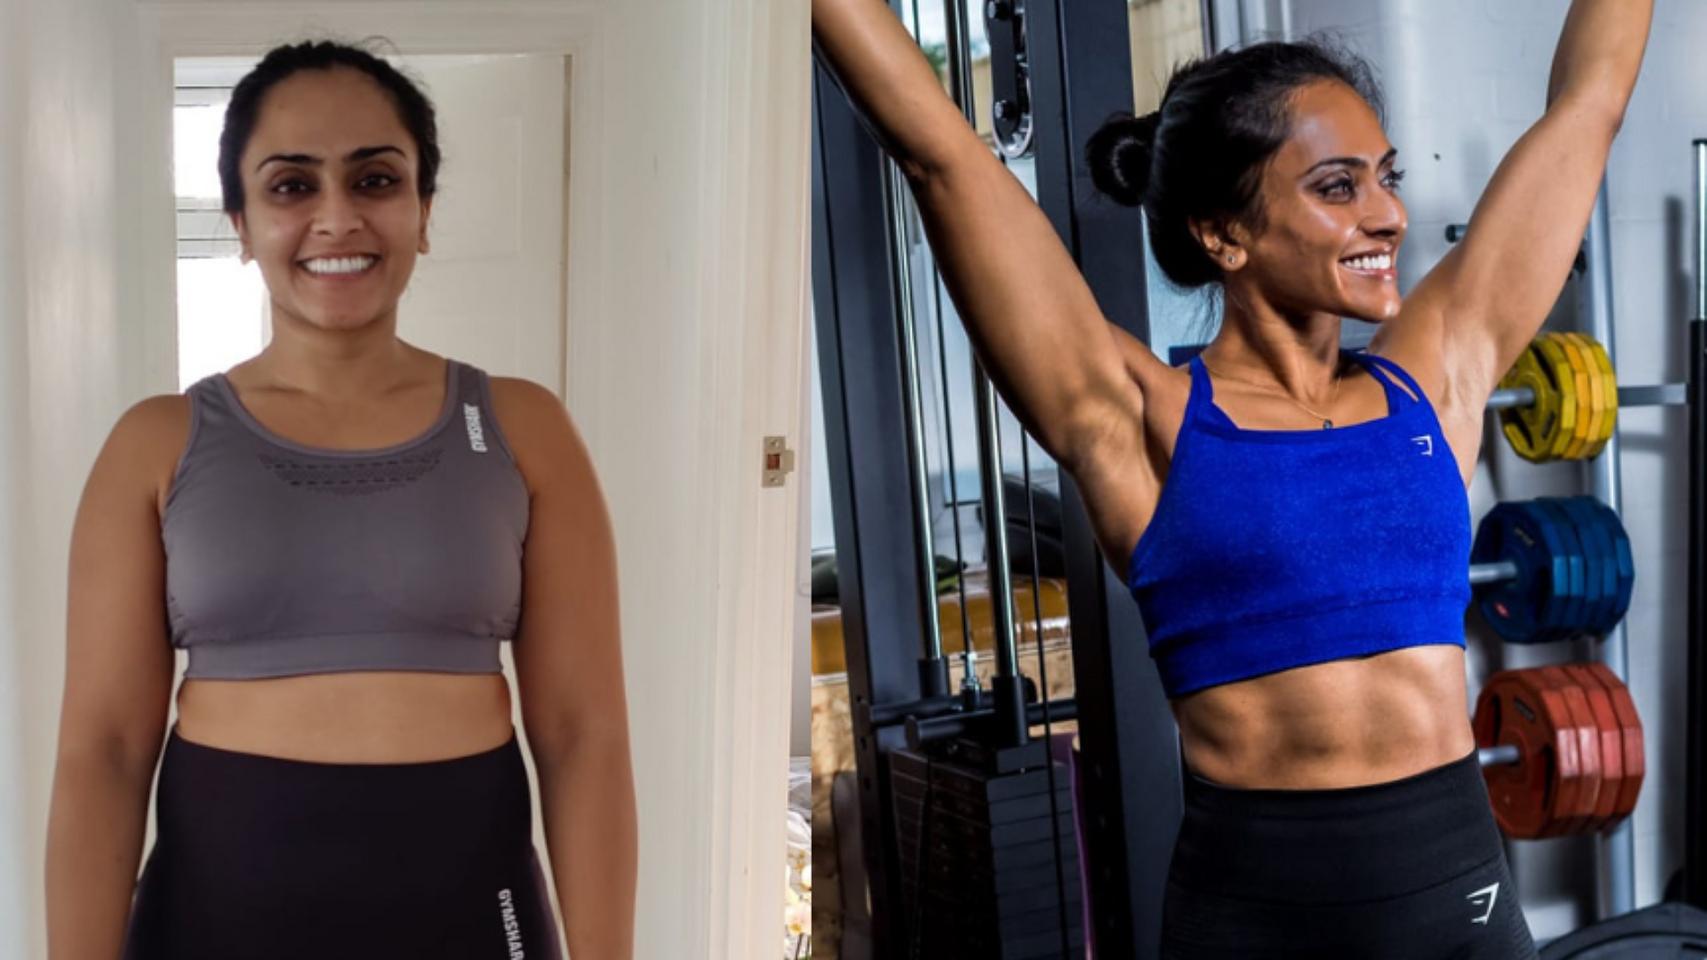 Transformation Thursday: How Meera lost 22kg to transform her life 🔥